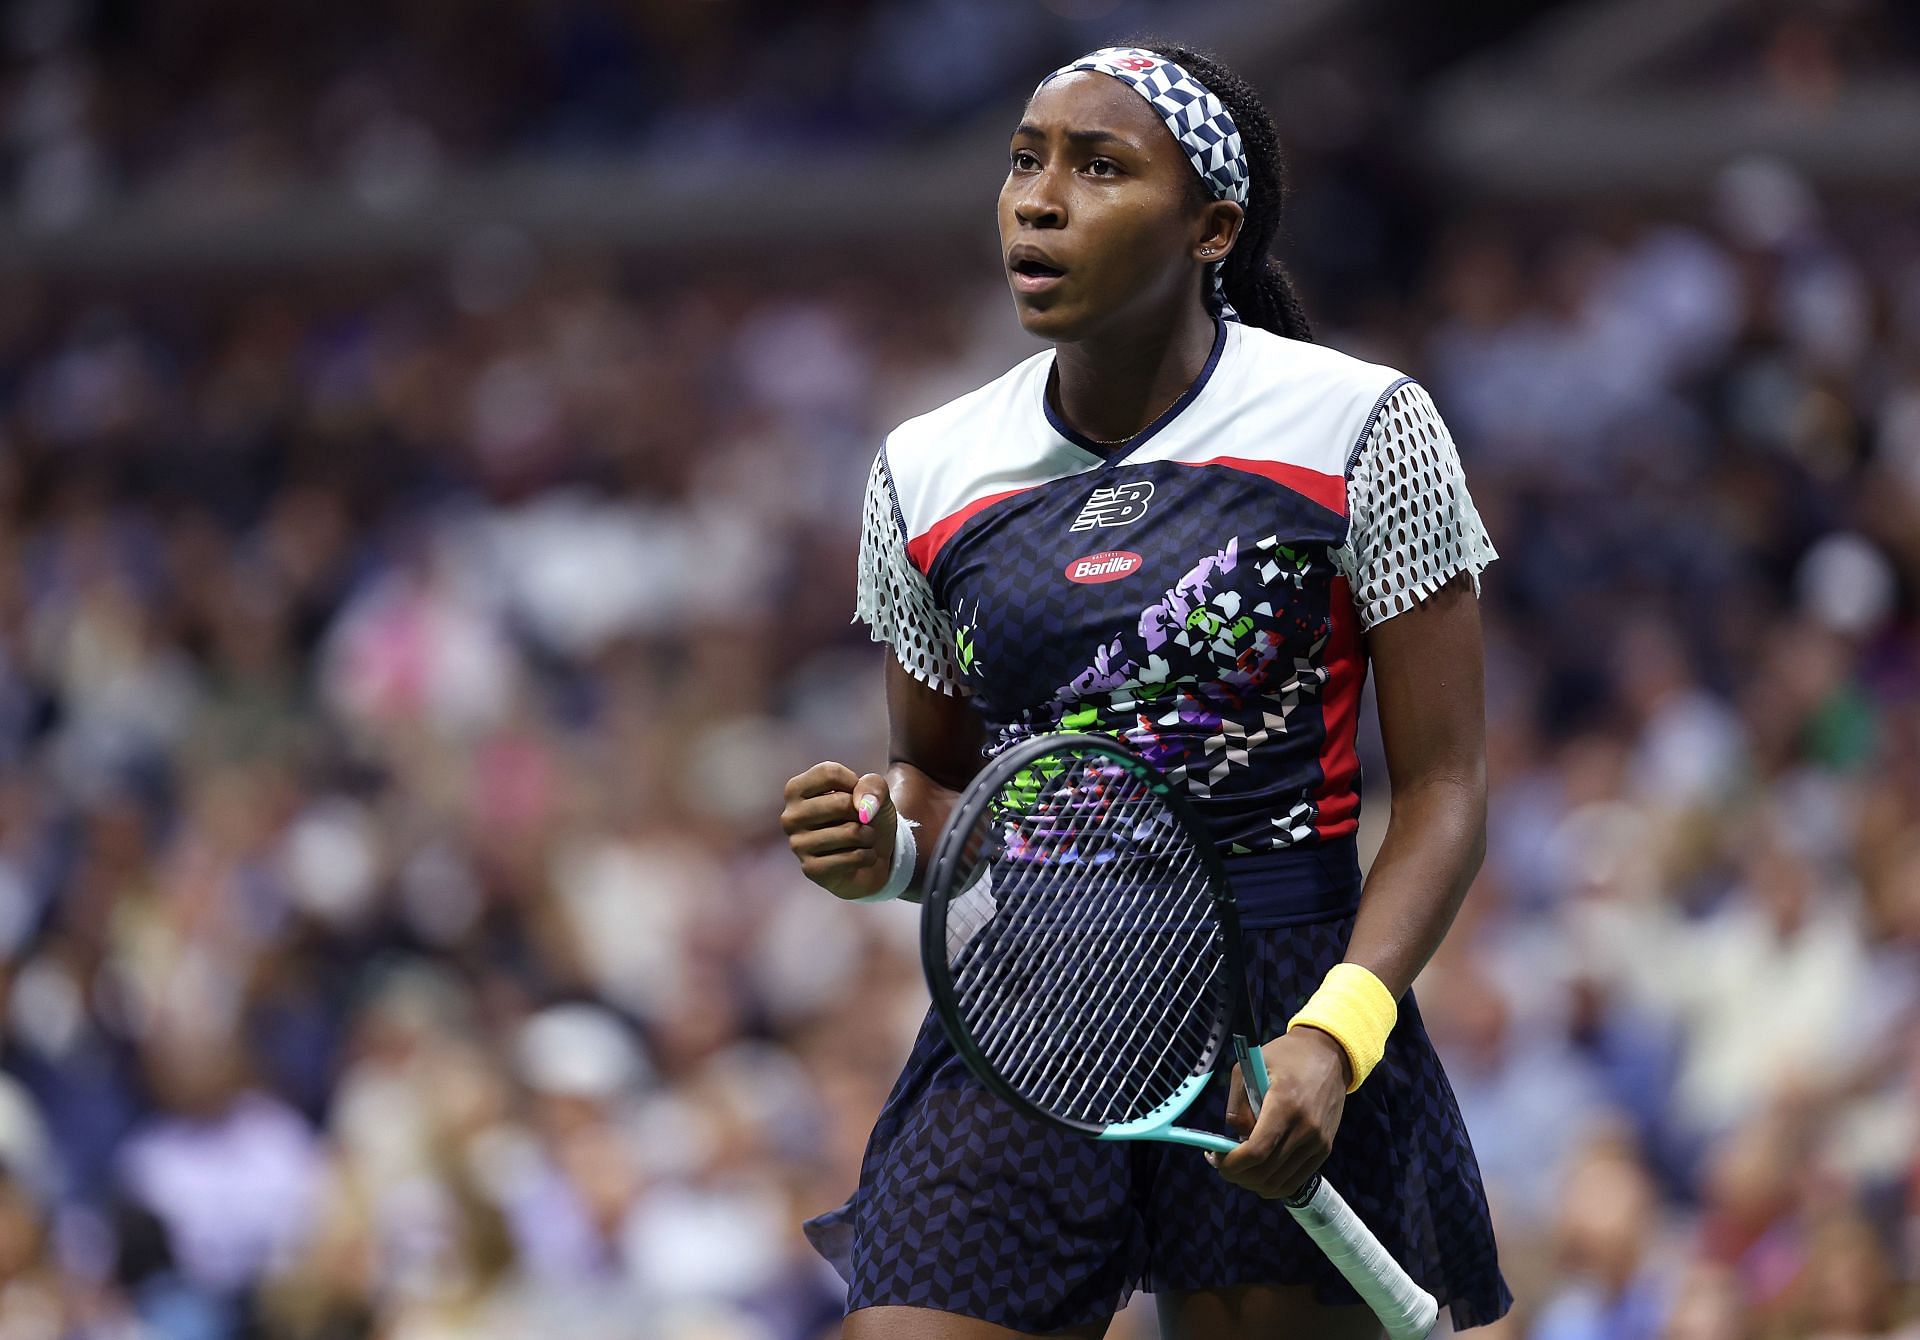 Coco Gauff entered the Top 10 of the WTA rankings following her quarterfinal run at the 2022 US Open